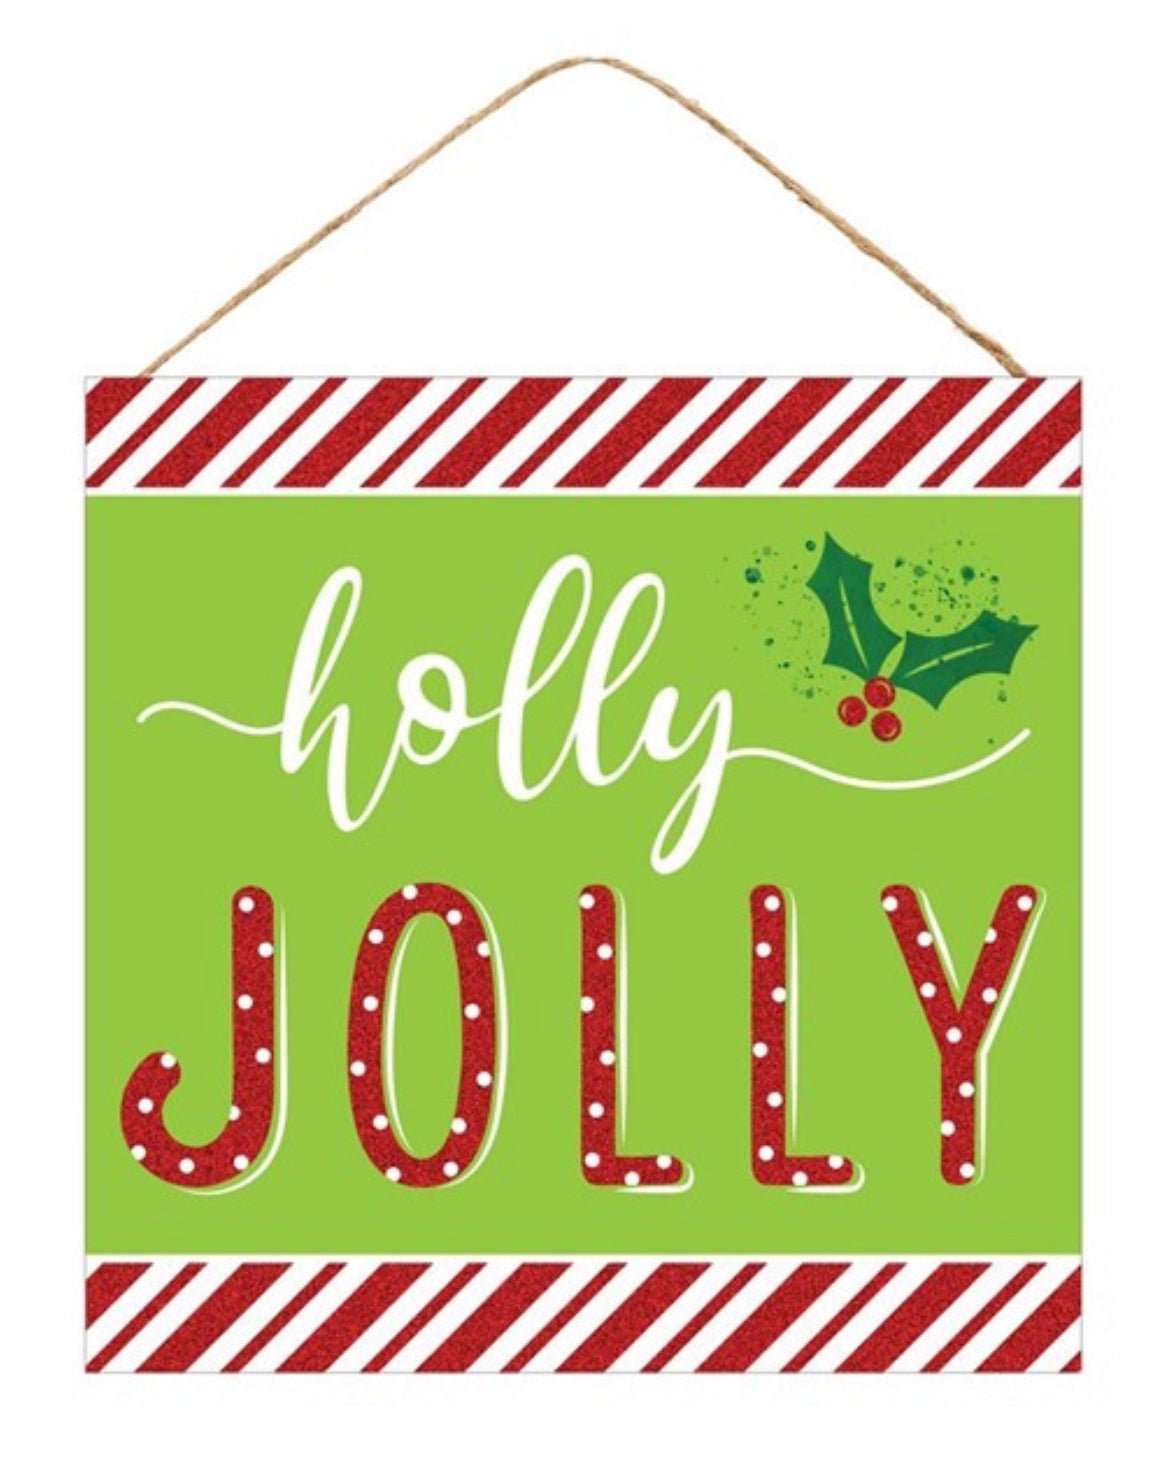 Holly jolly Christmas sign 10” square - Greenery Marketsigns for wreathsAP8836